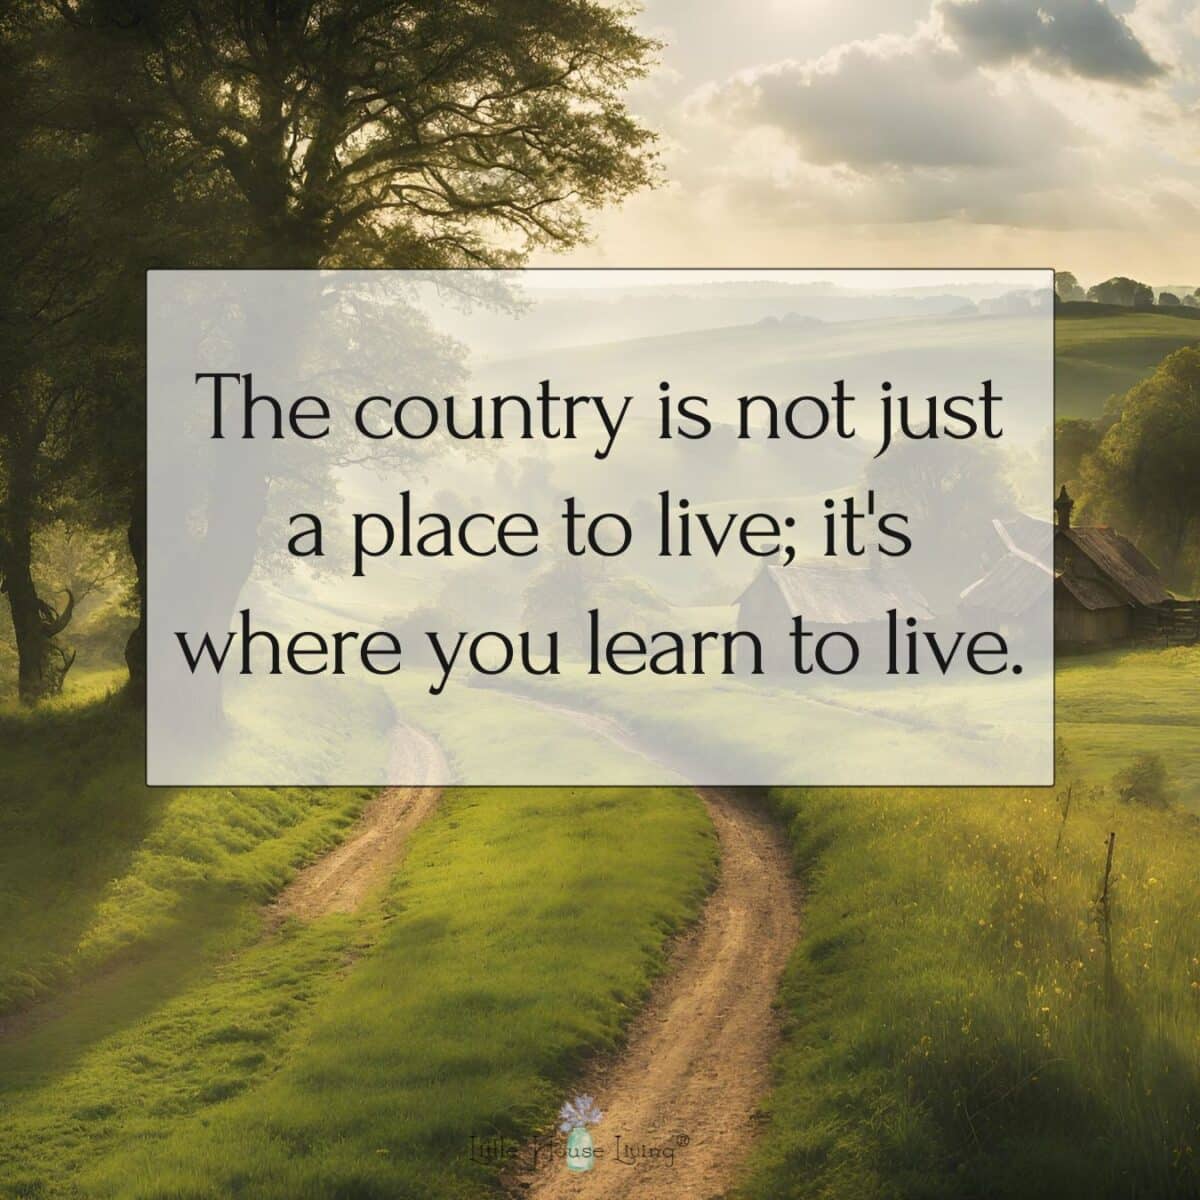 The country is not just a place to live; it's where you learn to live.